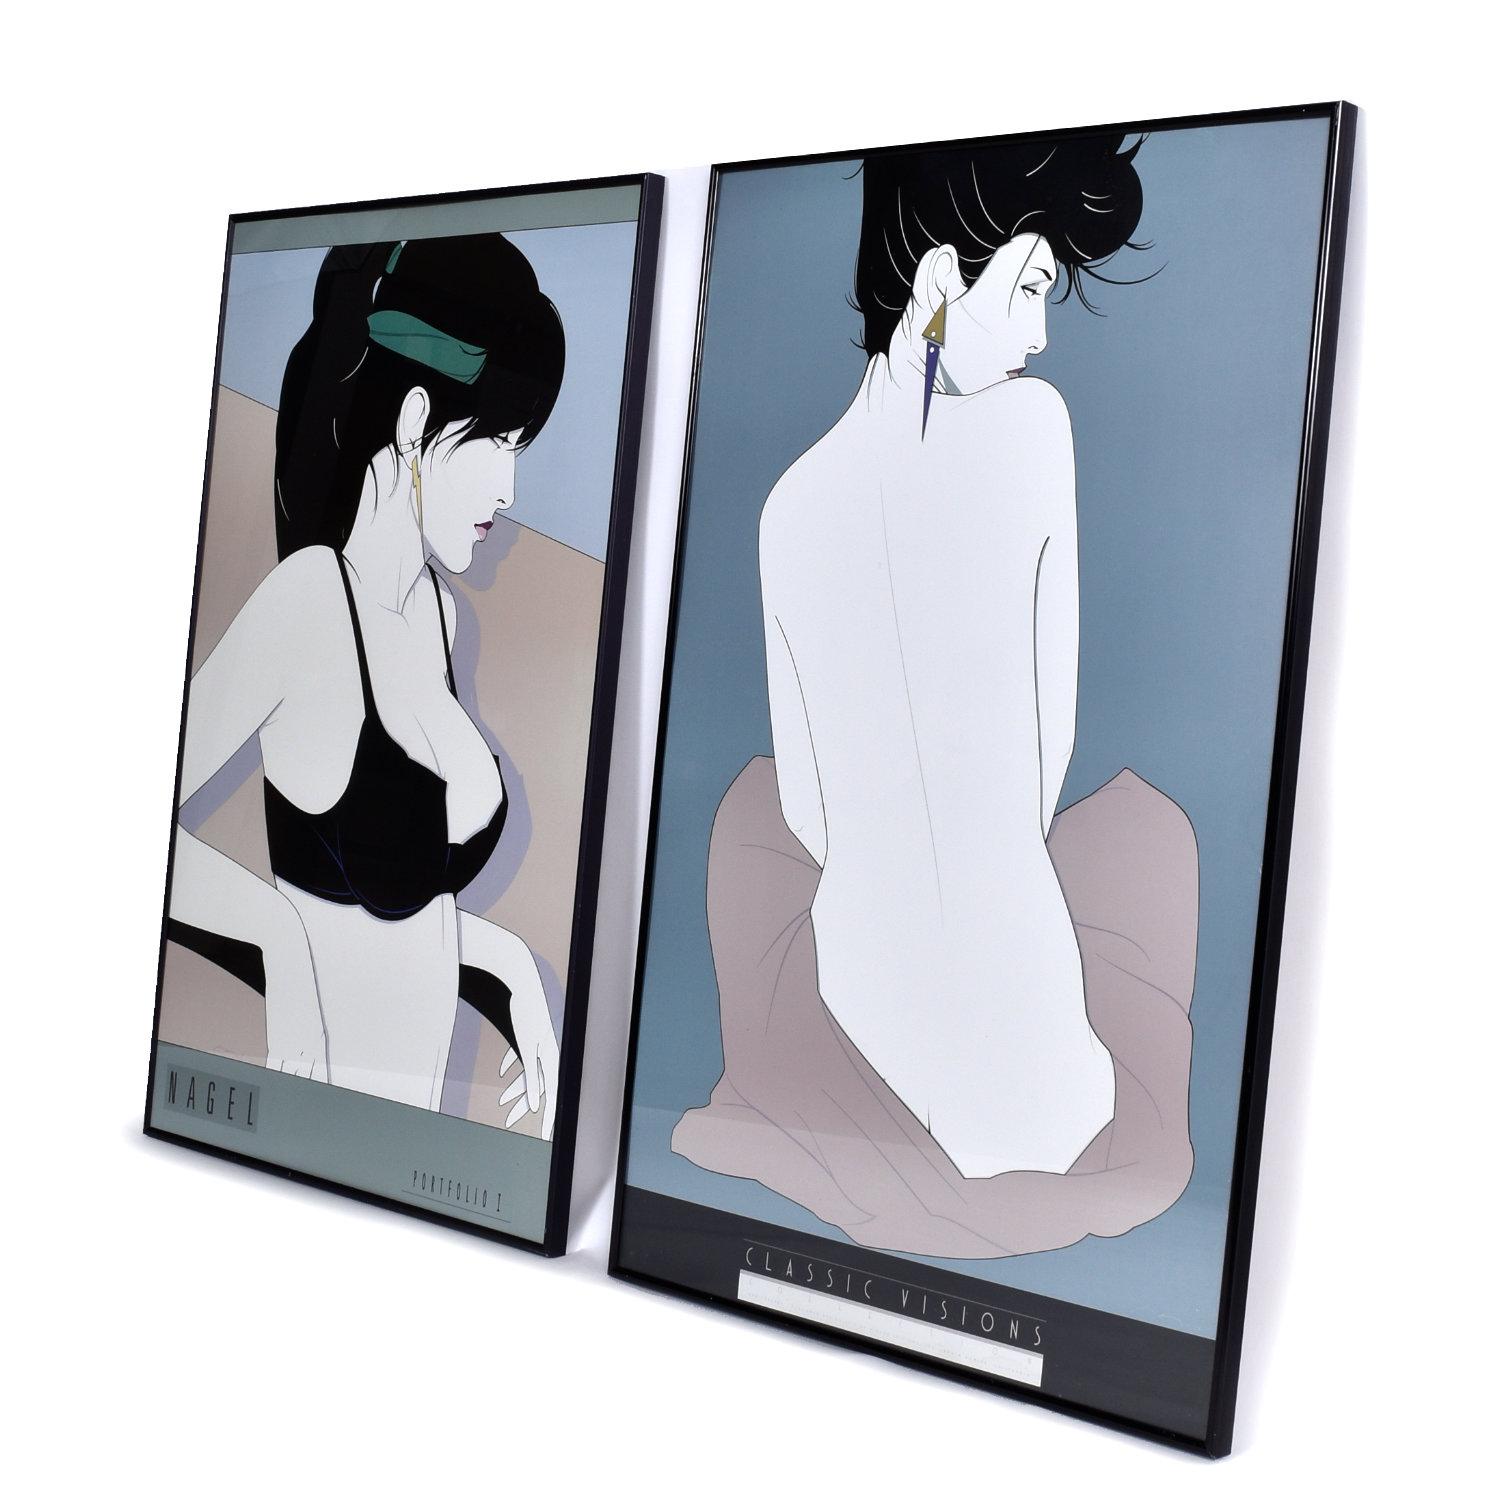 Stunning pair of vintage 1980s Patrick Nagel prints. These two images work perfectly as a duo! The first image is “Portfolio 1” – a young woman wearing a bralette and headband. The second image is “Classic Visions” featuring a woman with her back